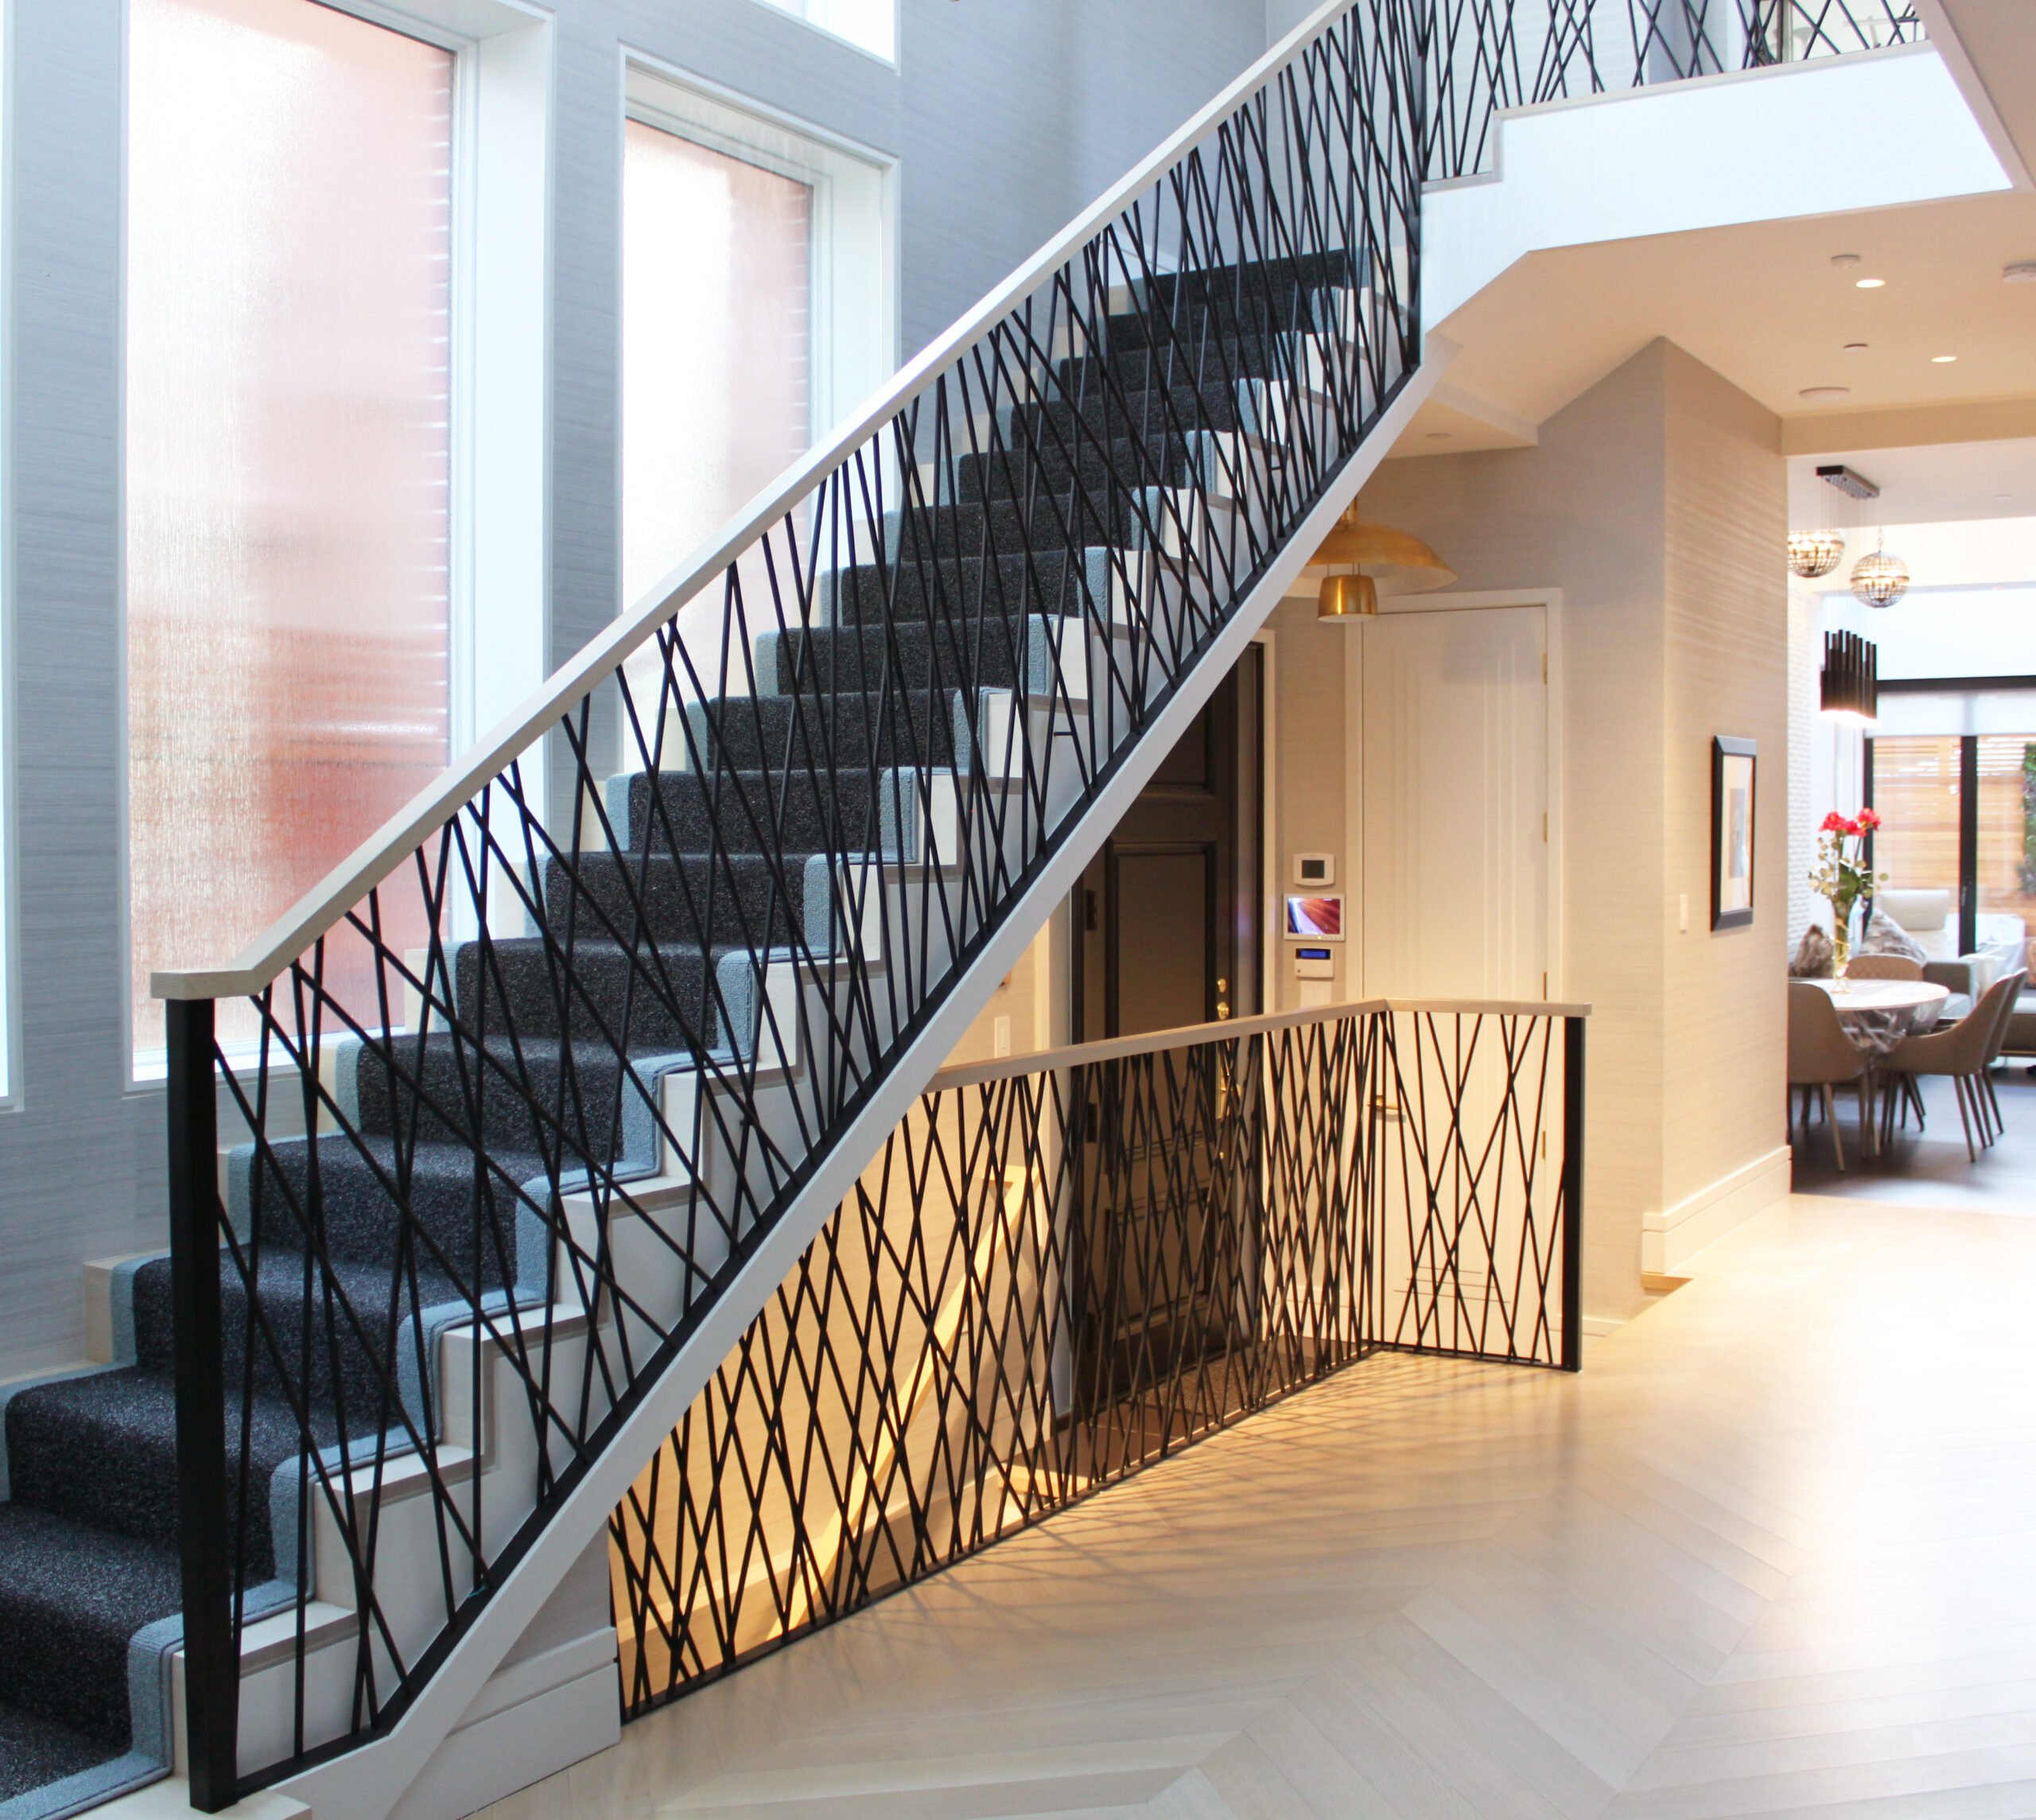 HMH Architectural Metal and Glass - Contemporary railings